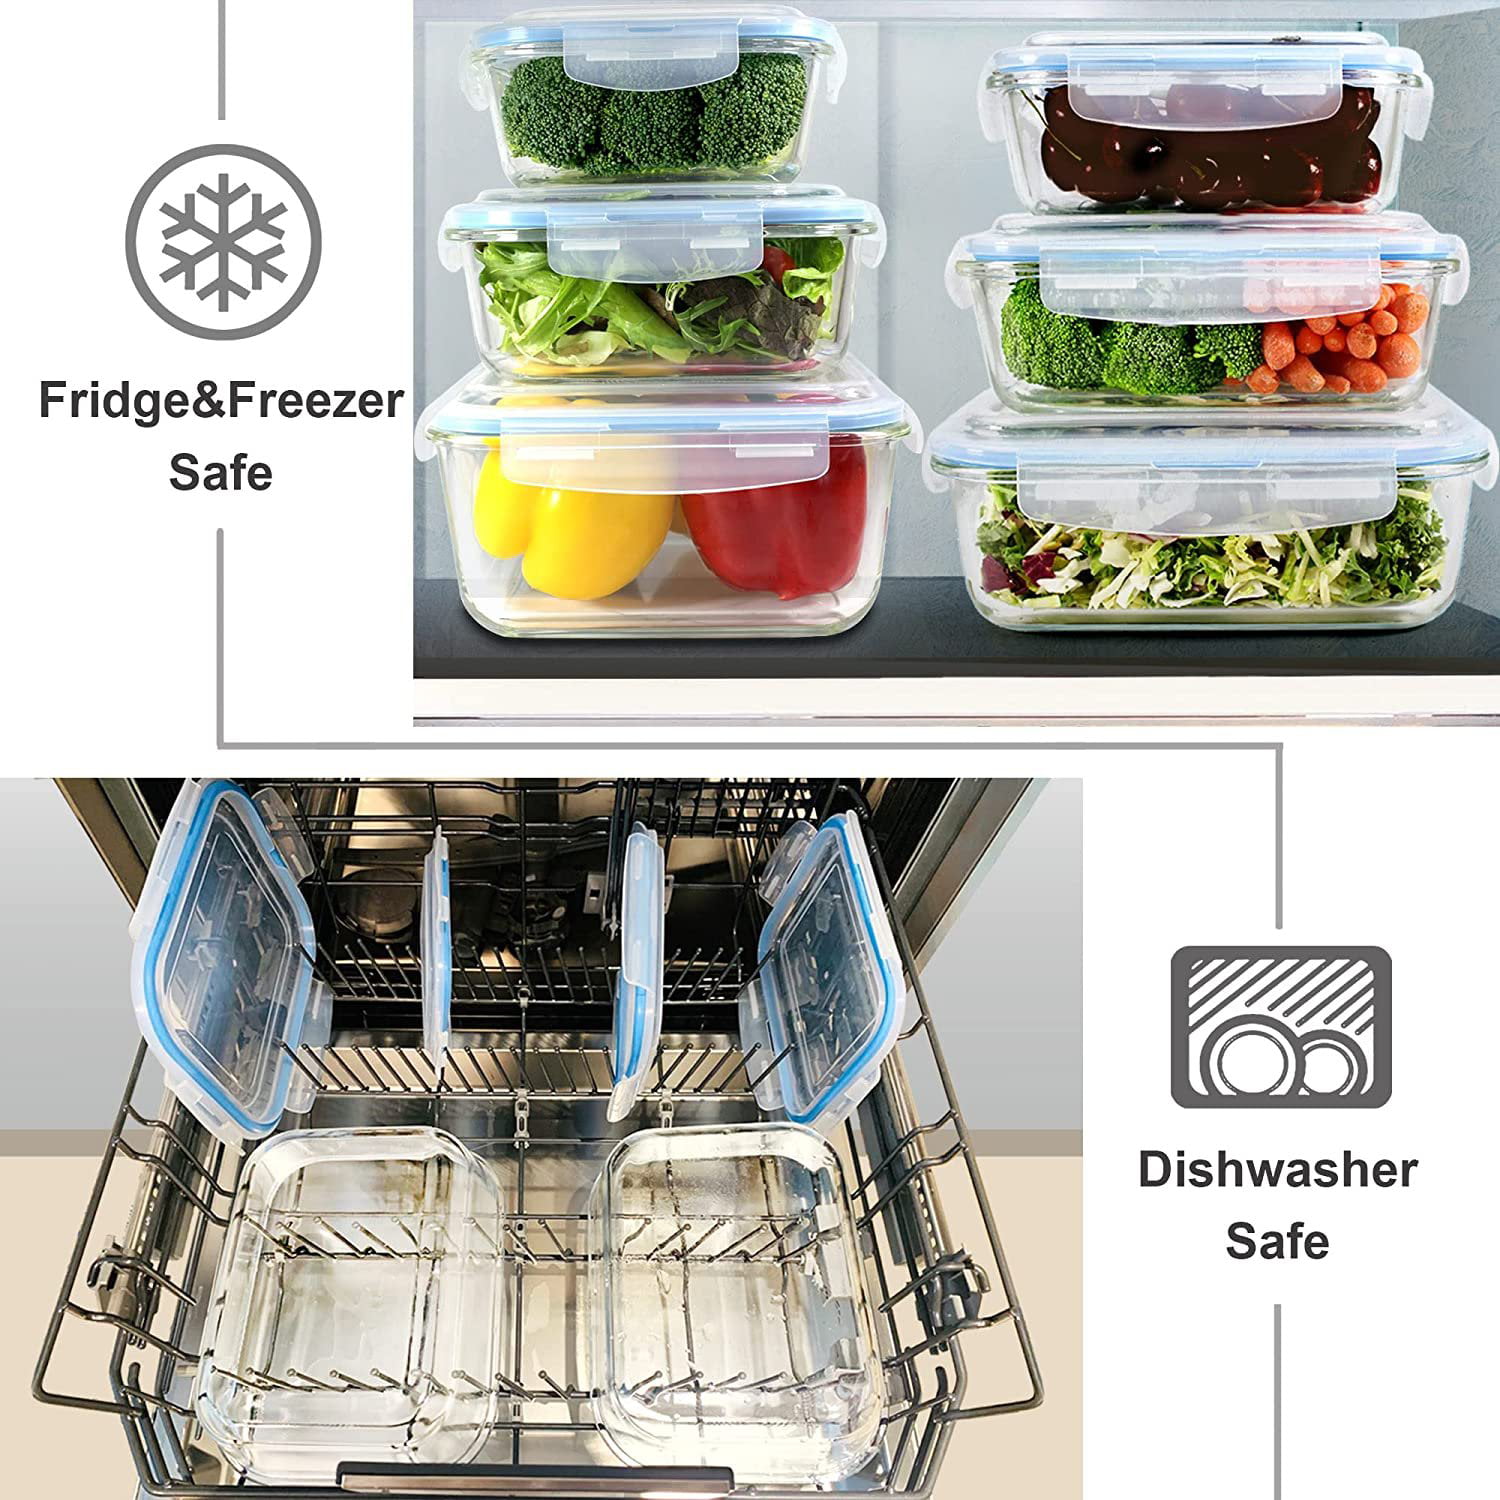 Extra Large Glass Food Storage Containers Set Of 3 - 101 OZ/ 54 OZ/ 16 OZ  Deep Rectangular Glass Food Container with Lid, Leak Proof, Microwave,  Dishwasher, and Oven Safe By Moss